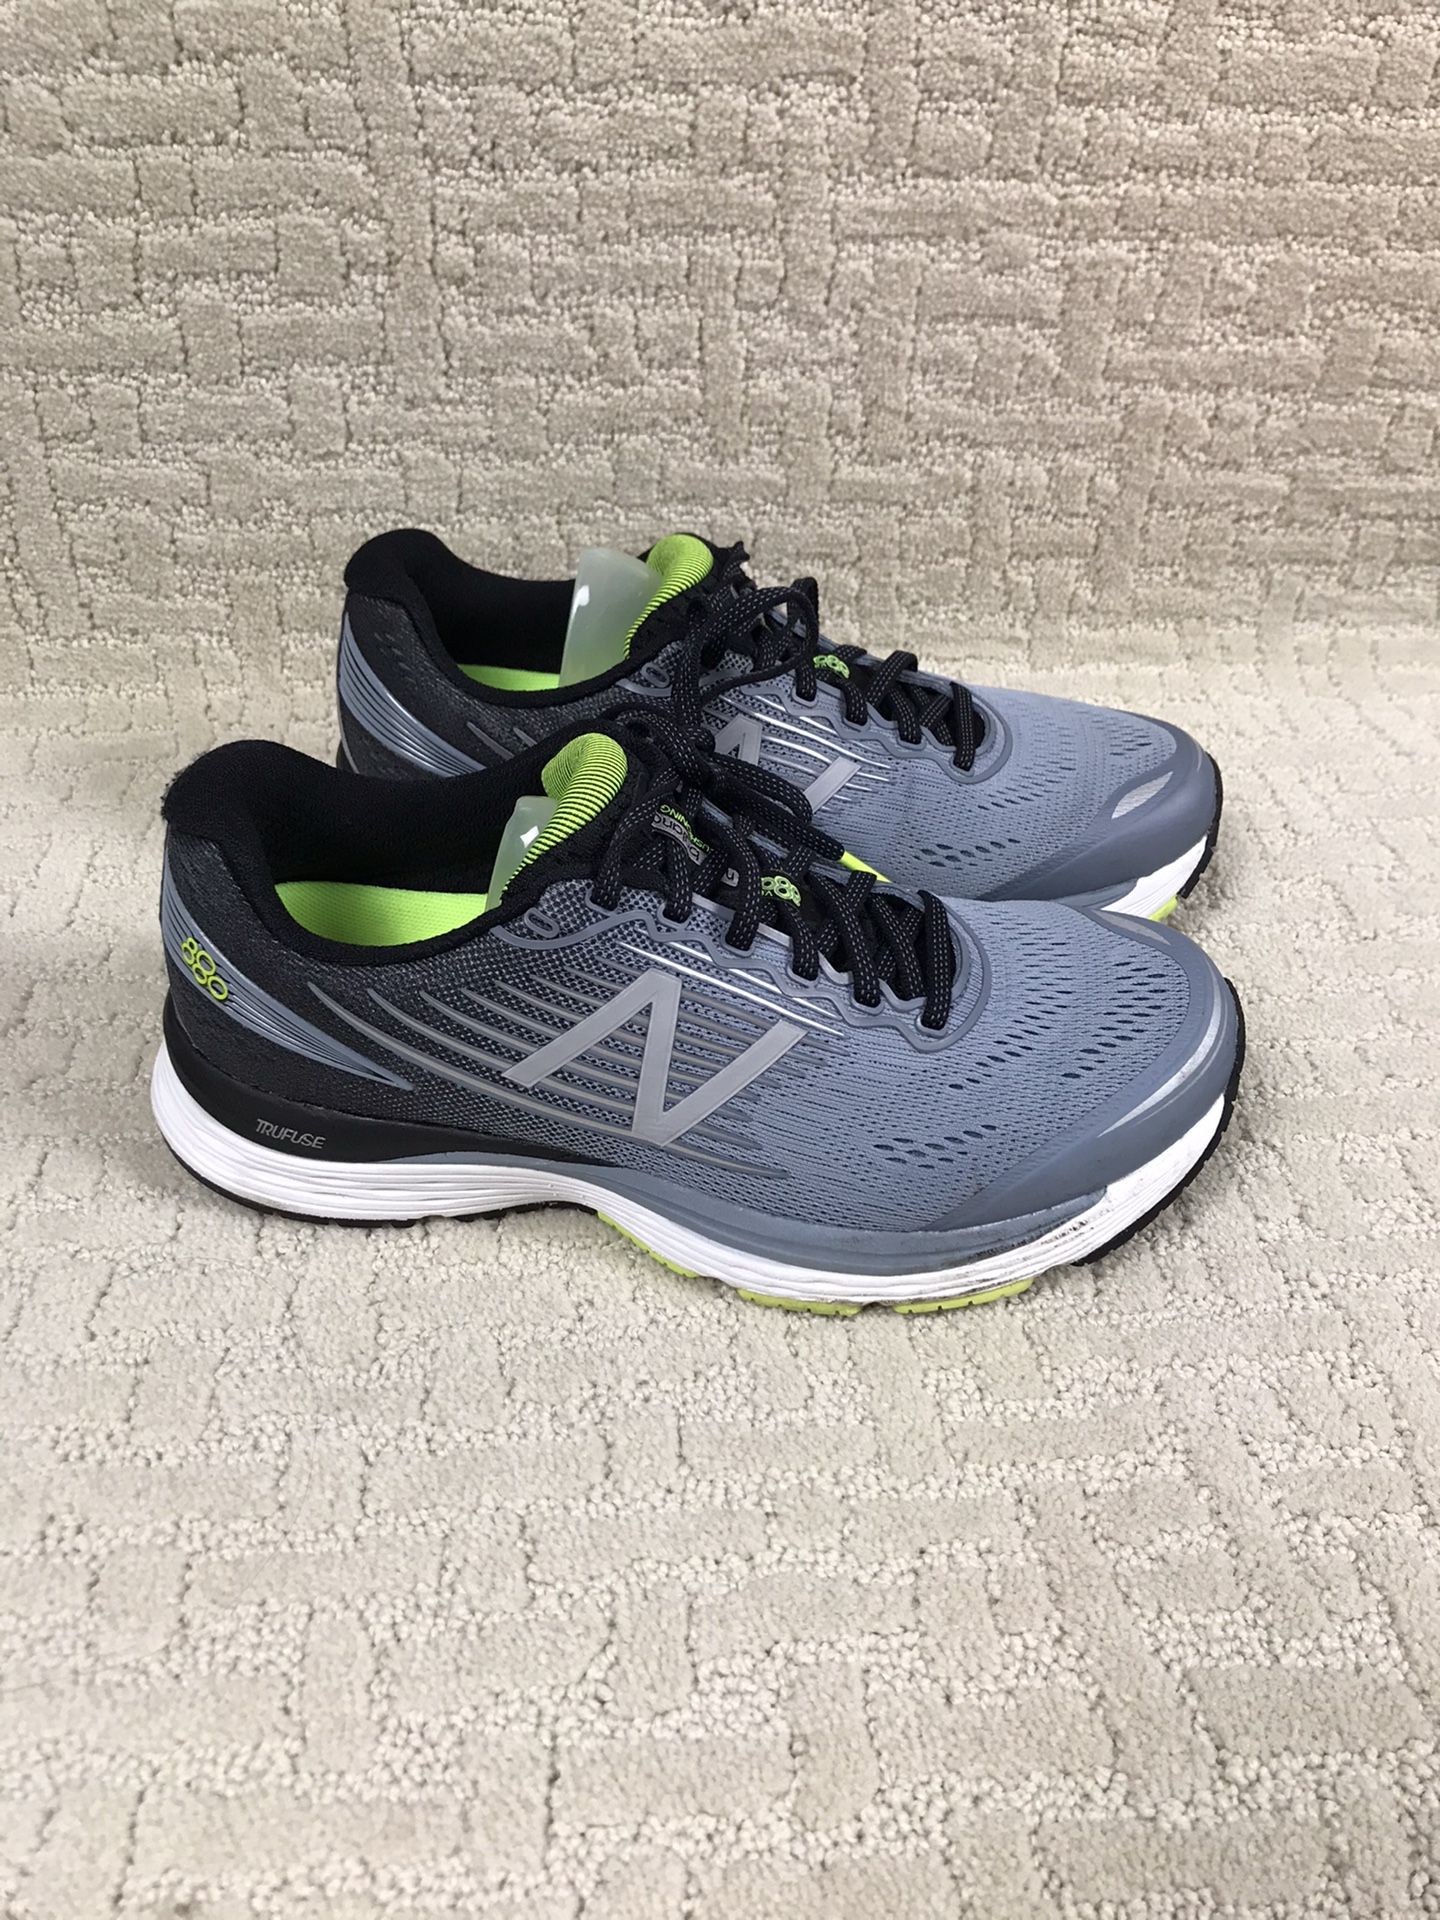 New Balance 880v8 Running Shoes Mens Grey With Black Gently used